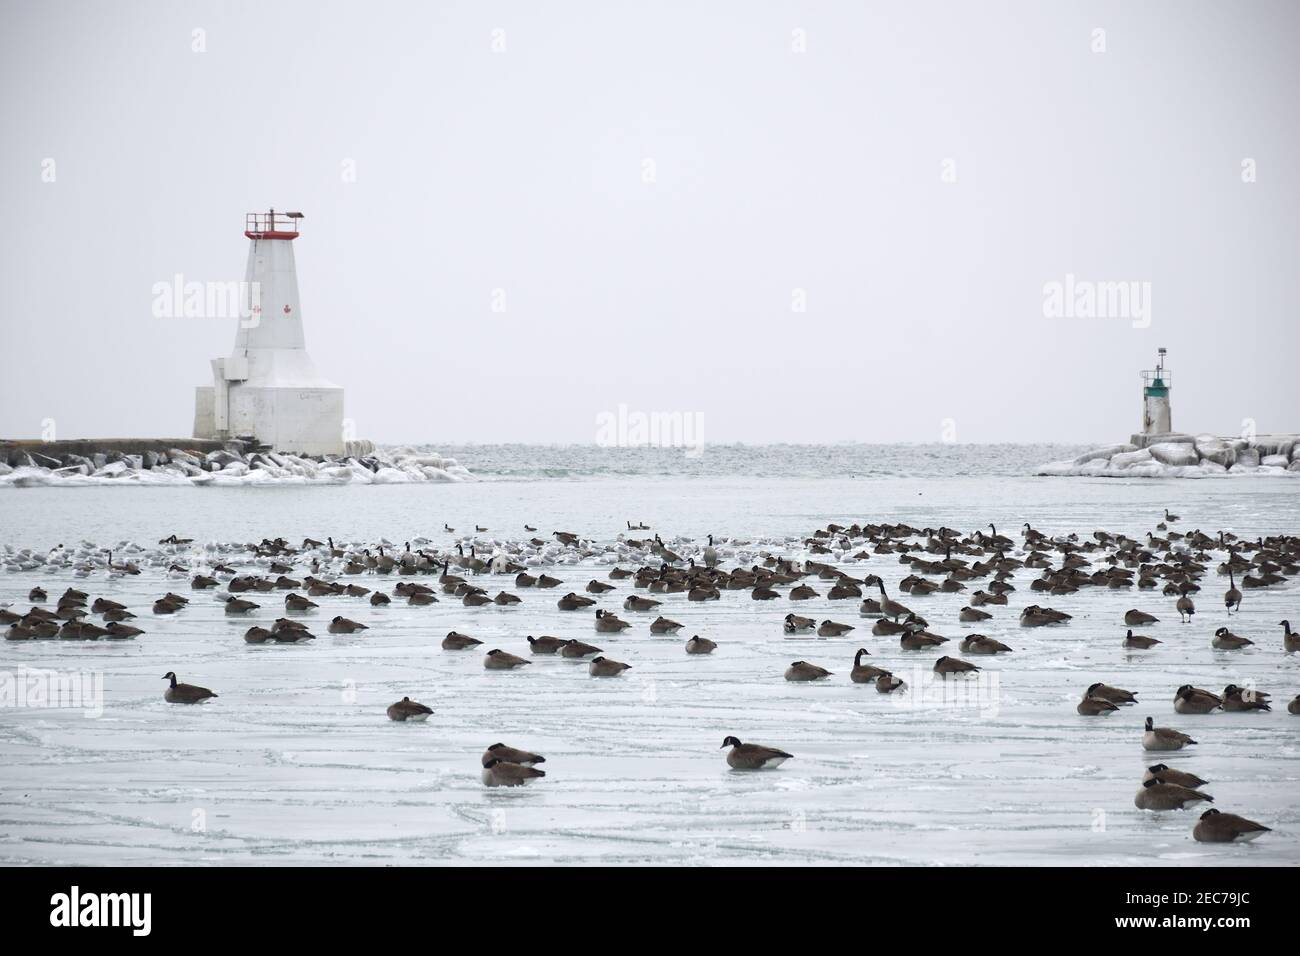 geeses and seaguls resting on the ice during cold spell Stock Photo